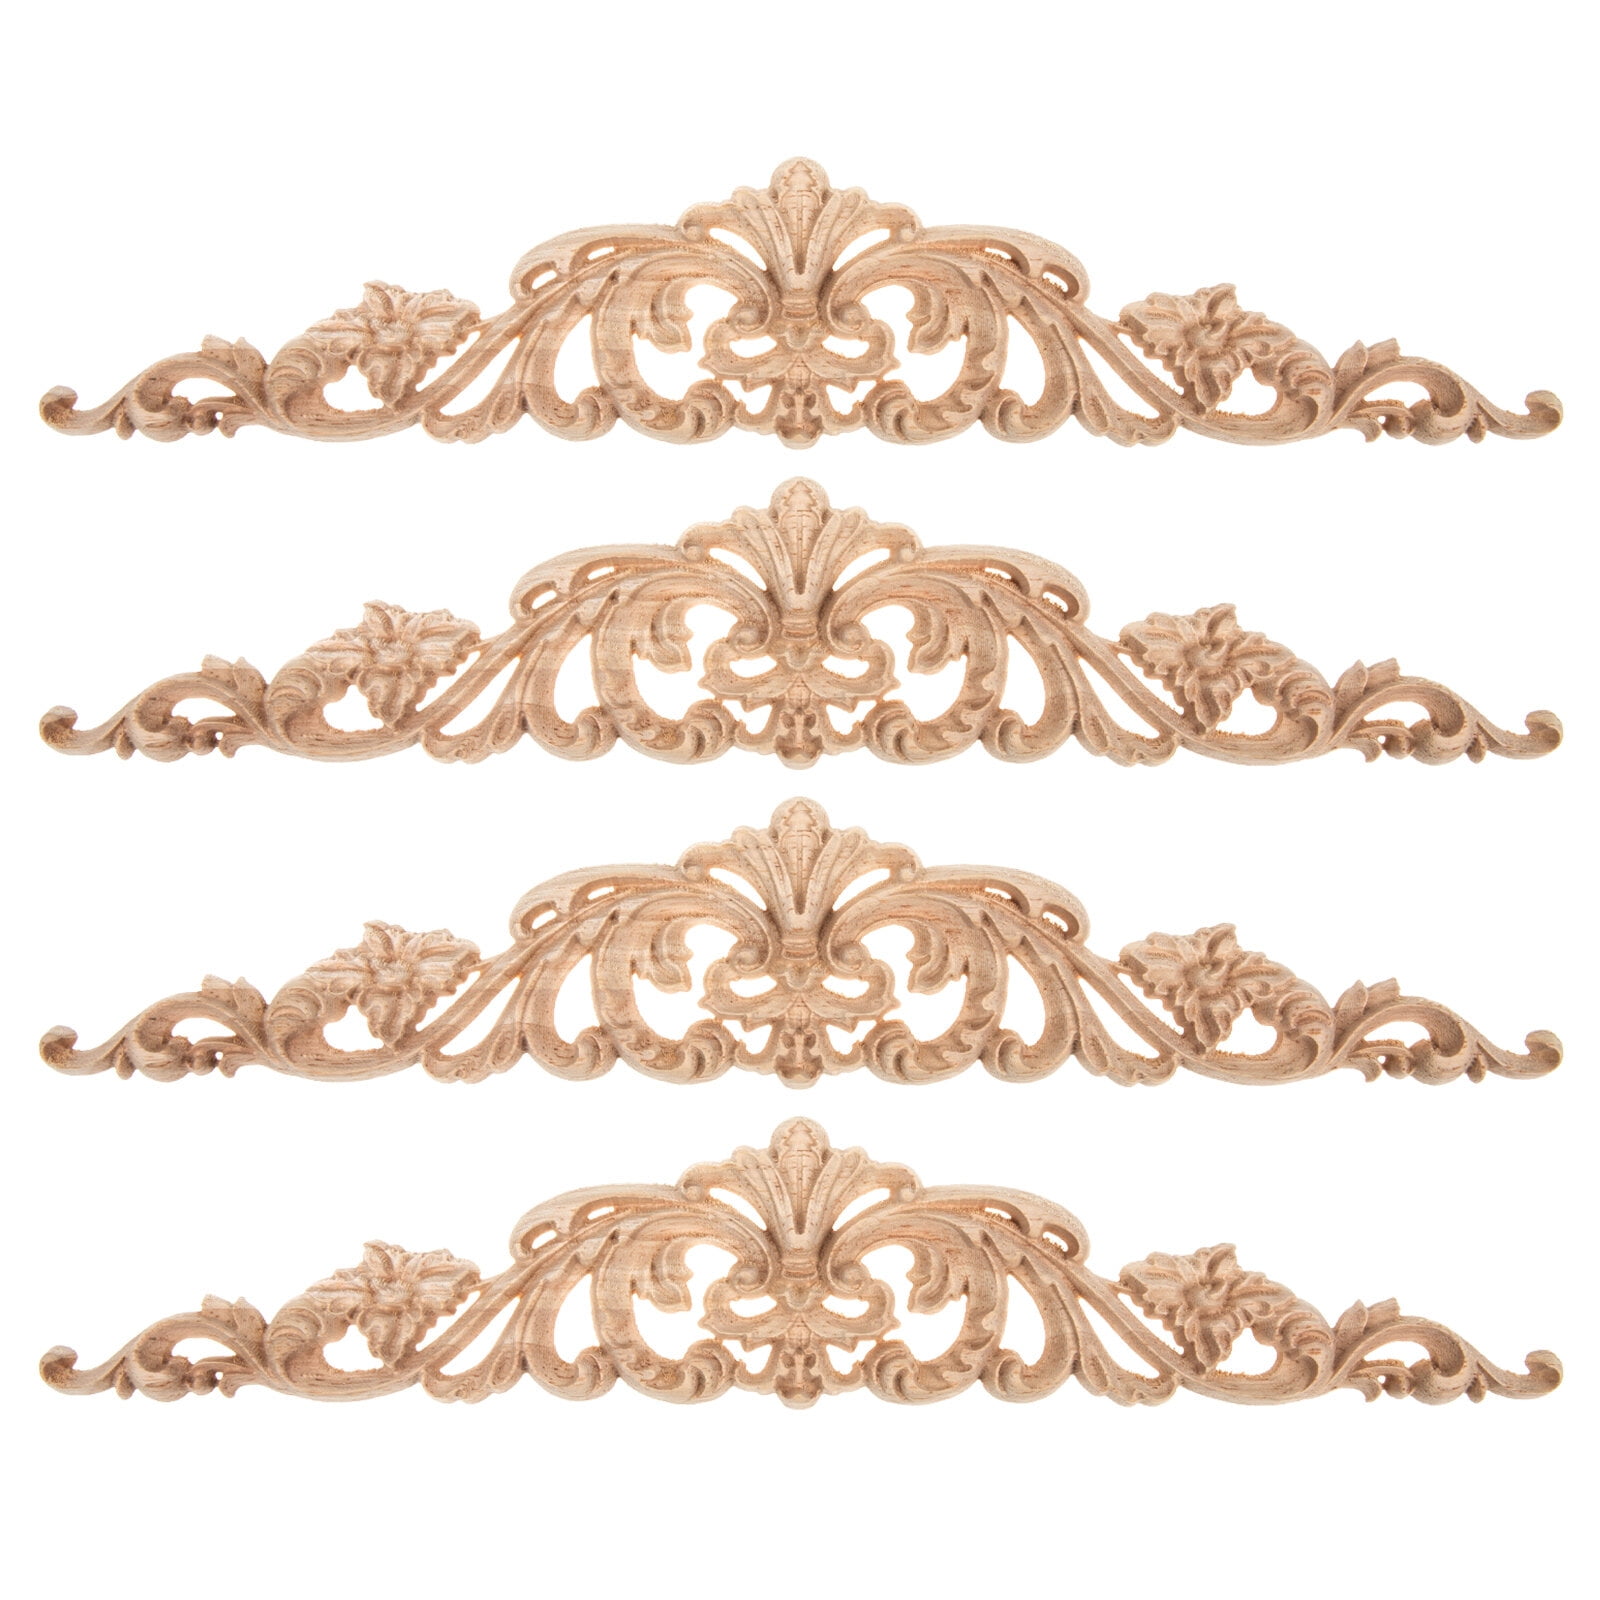 Furniture Carving Decoration Throne Chairs for Party Wooden Decal Flower Embellishments Frames Corner Fans Doorways 4 Pcs